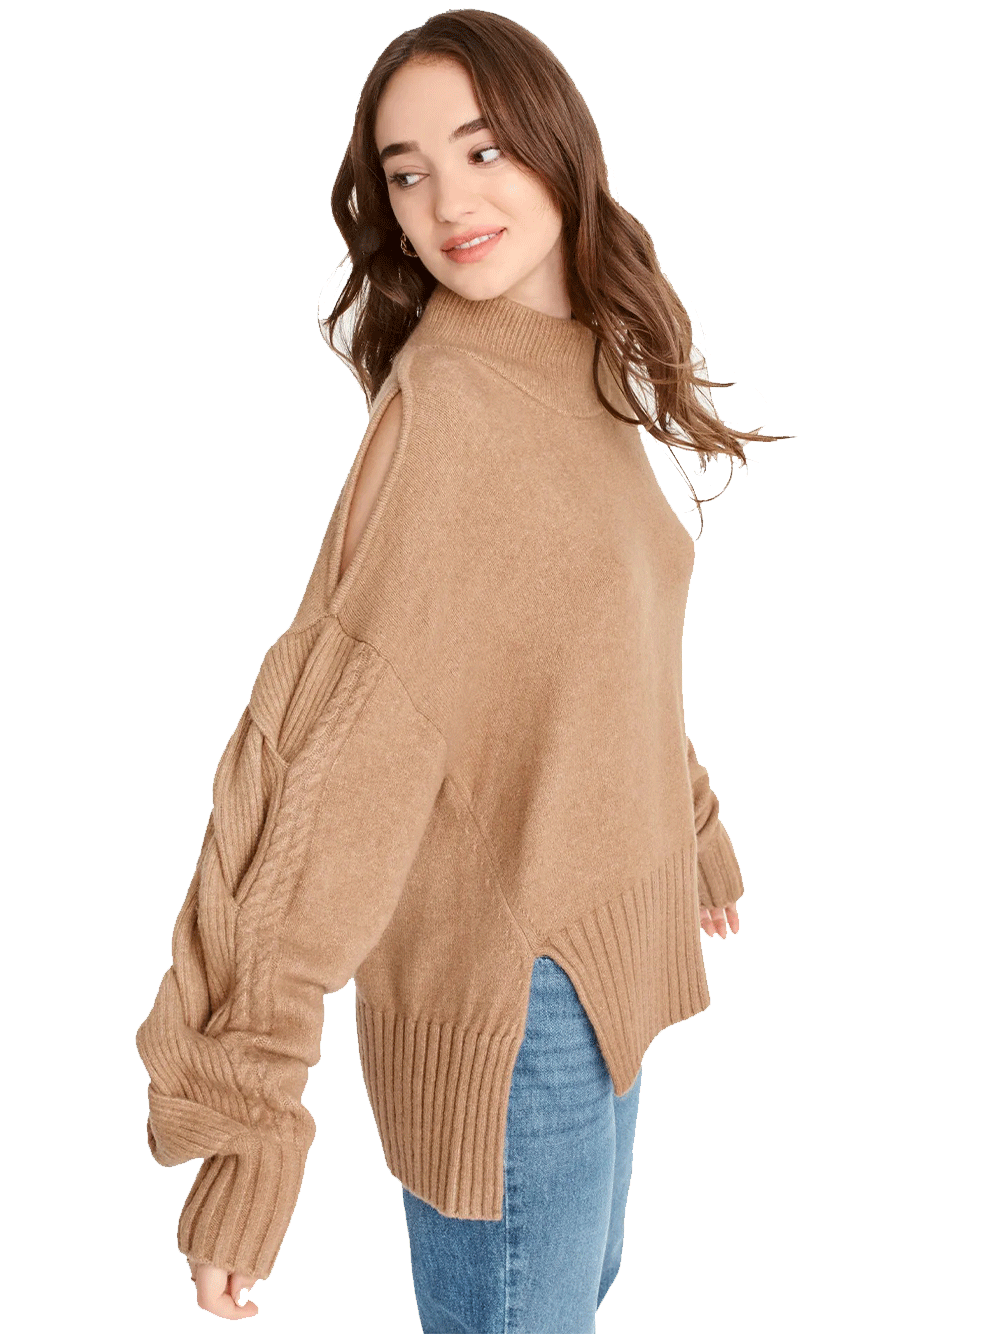     DKNY_Braided-Mock-Neck-High-Low-Sweater_Brown-01